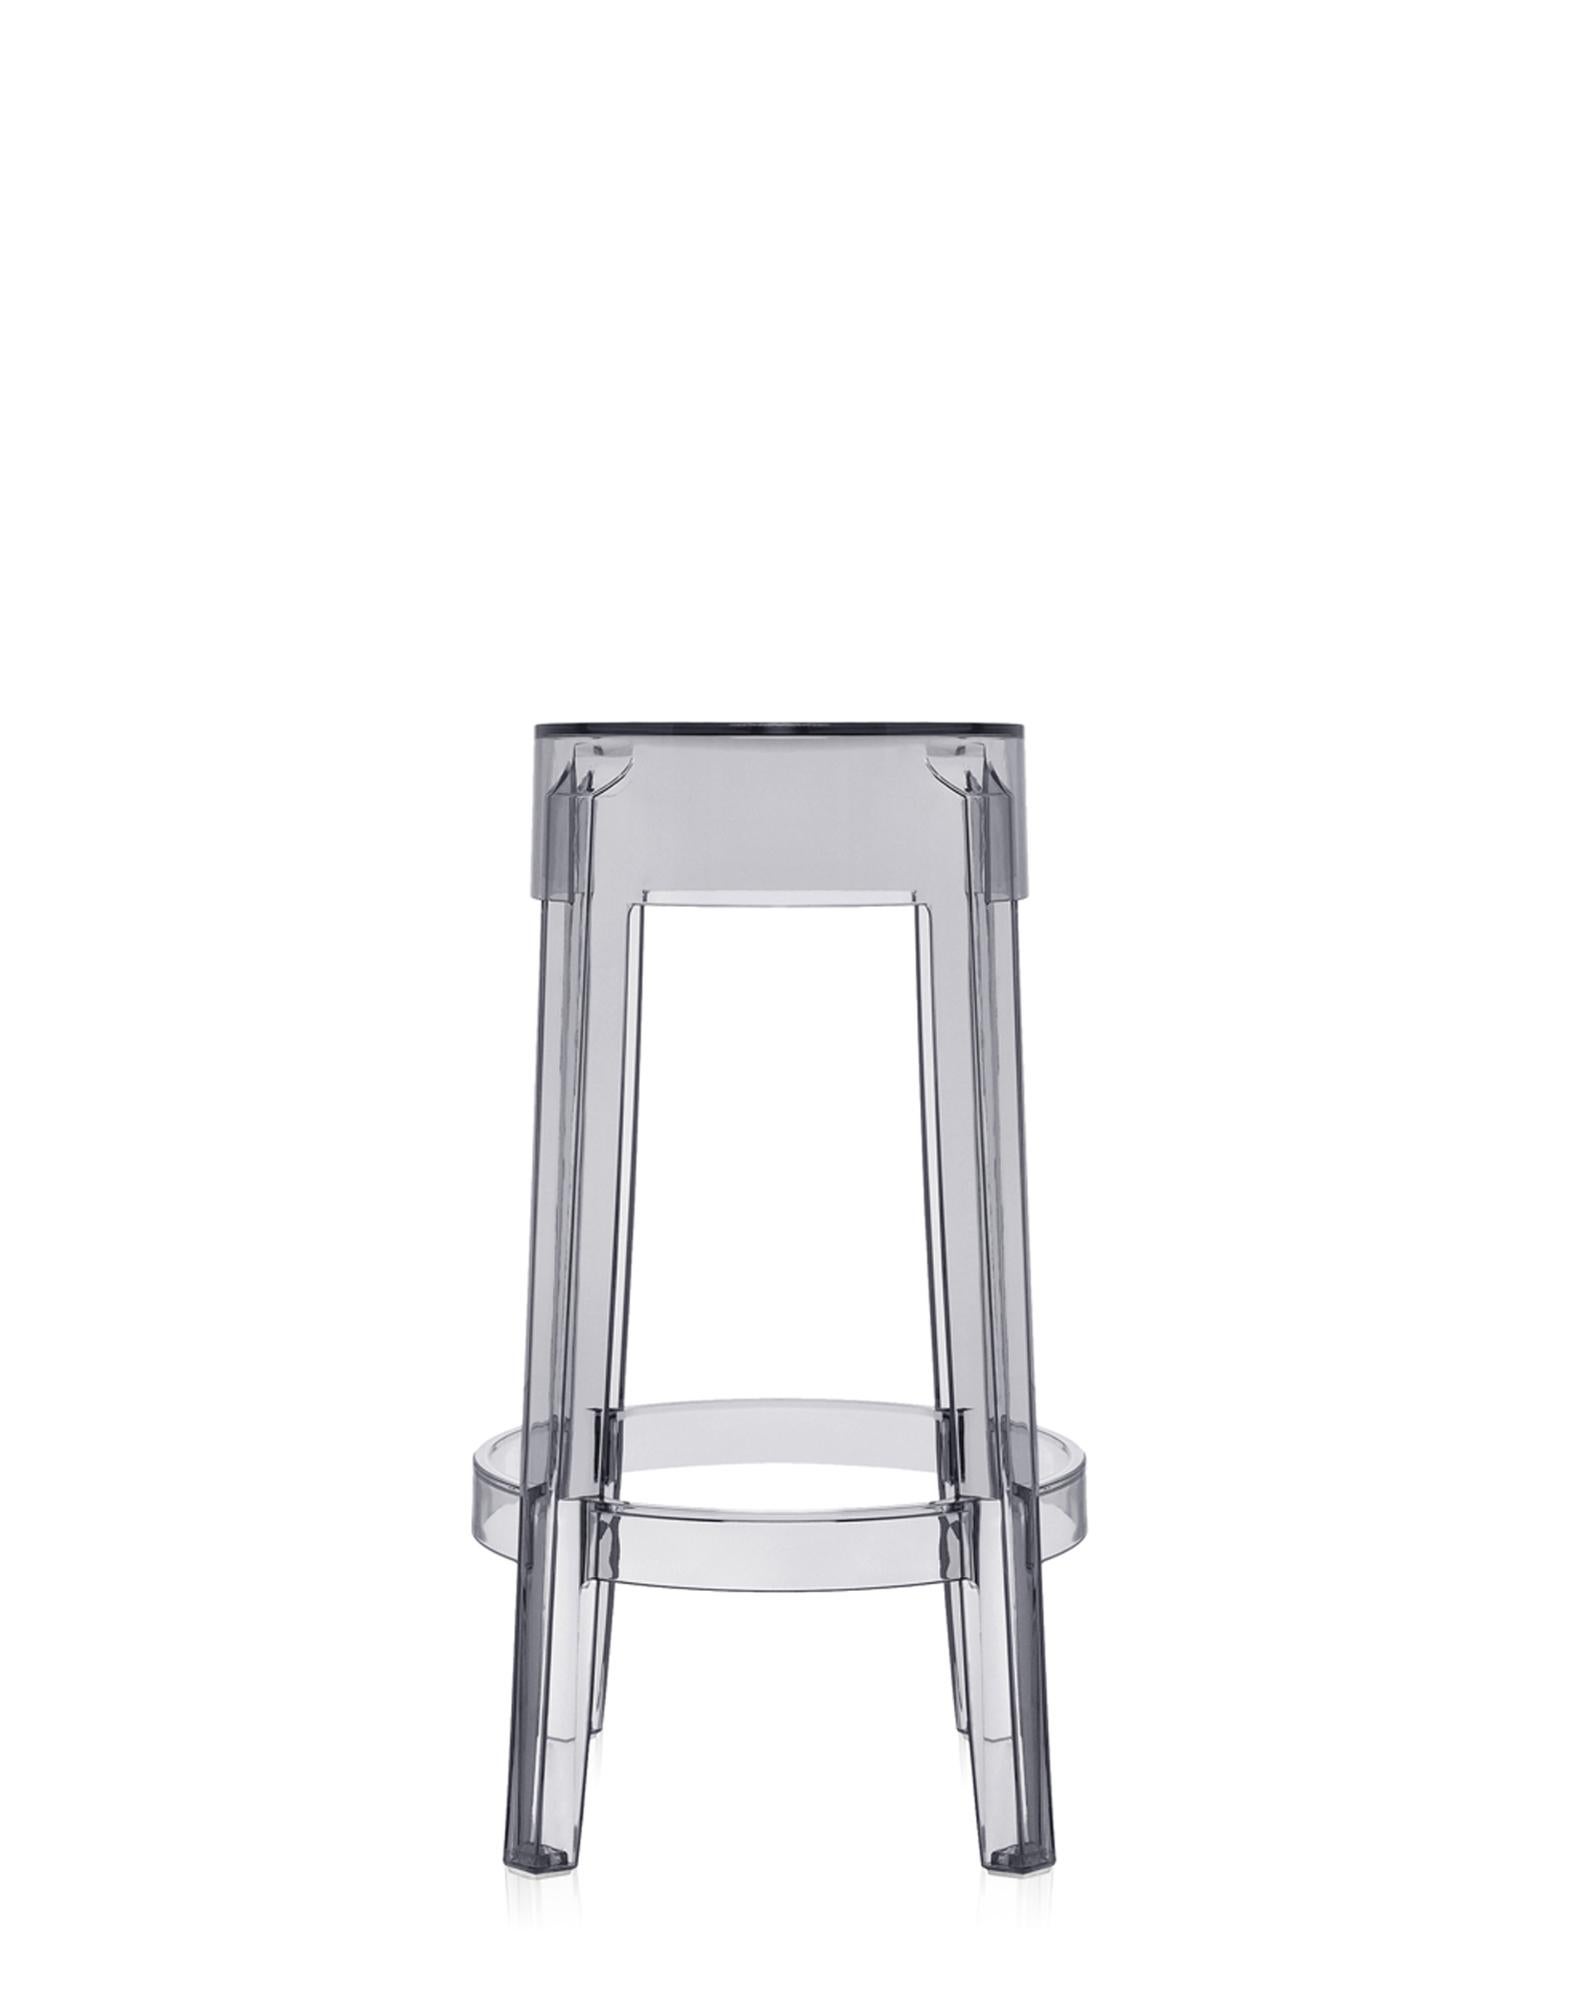 The shape conjures up stools of the 1800s and the line of the legs is rounded and slightly upturned, an icon of the classic high stool. Charles Ghost is constructed from a single block of transparent polycarbonate which makes it indestructible and